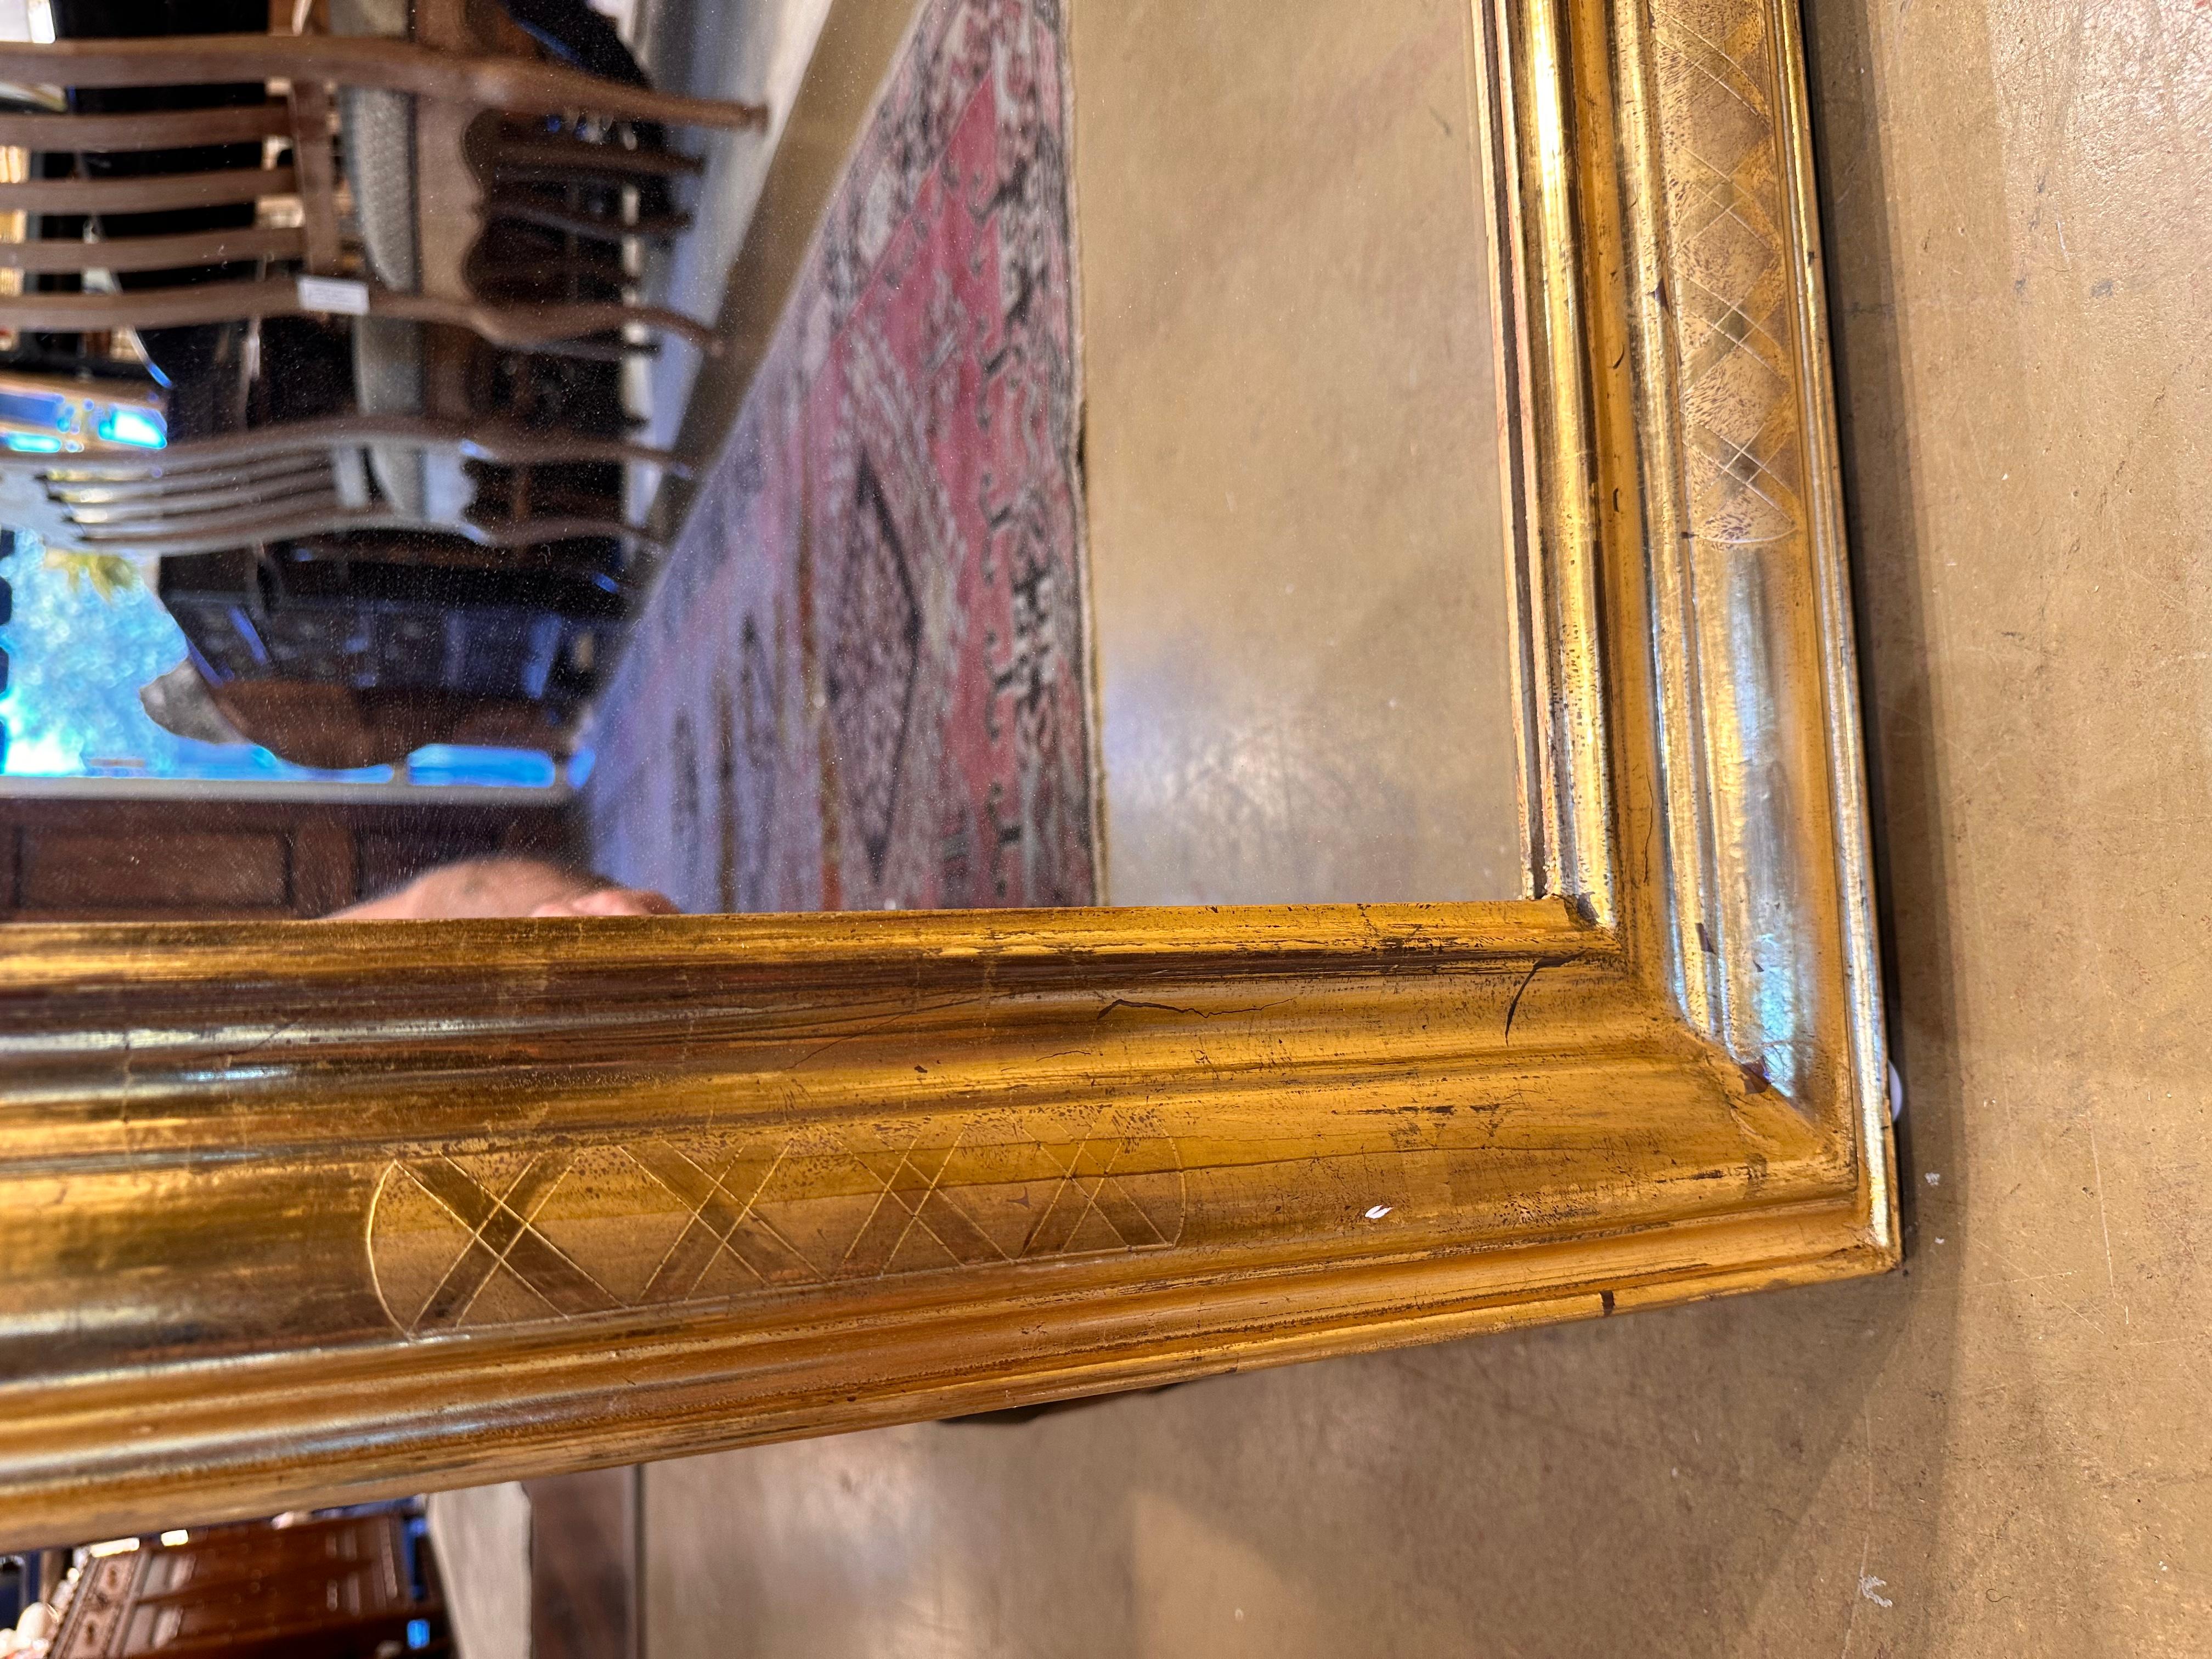 This is a beautiful Louis Philippe mirror! This mirror holds to a simple quiet design without a lot of busyness going on. However, there is delicate criss crossing on the edges that adds just a touch of ornamentation. This mirror is unique in that